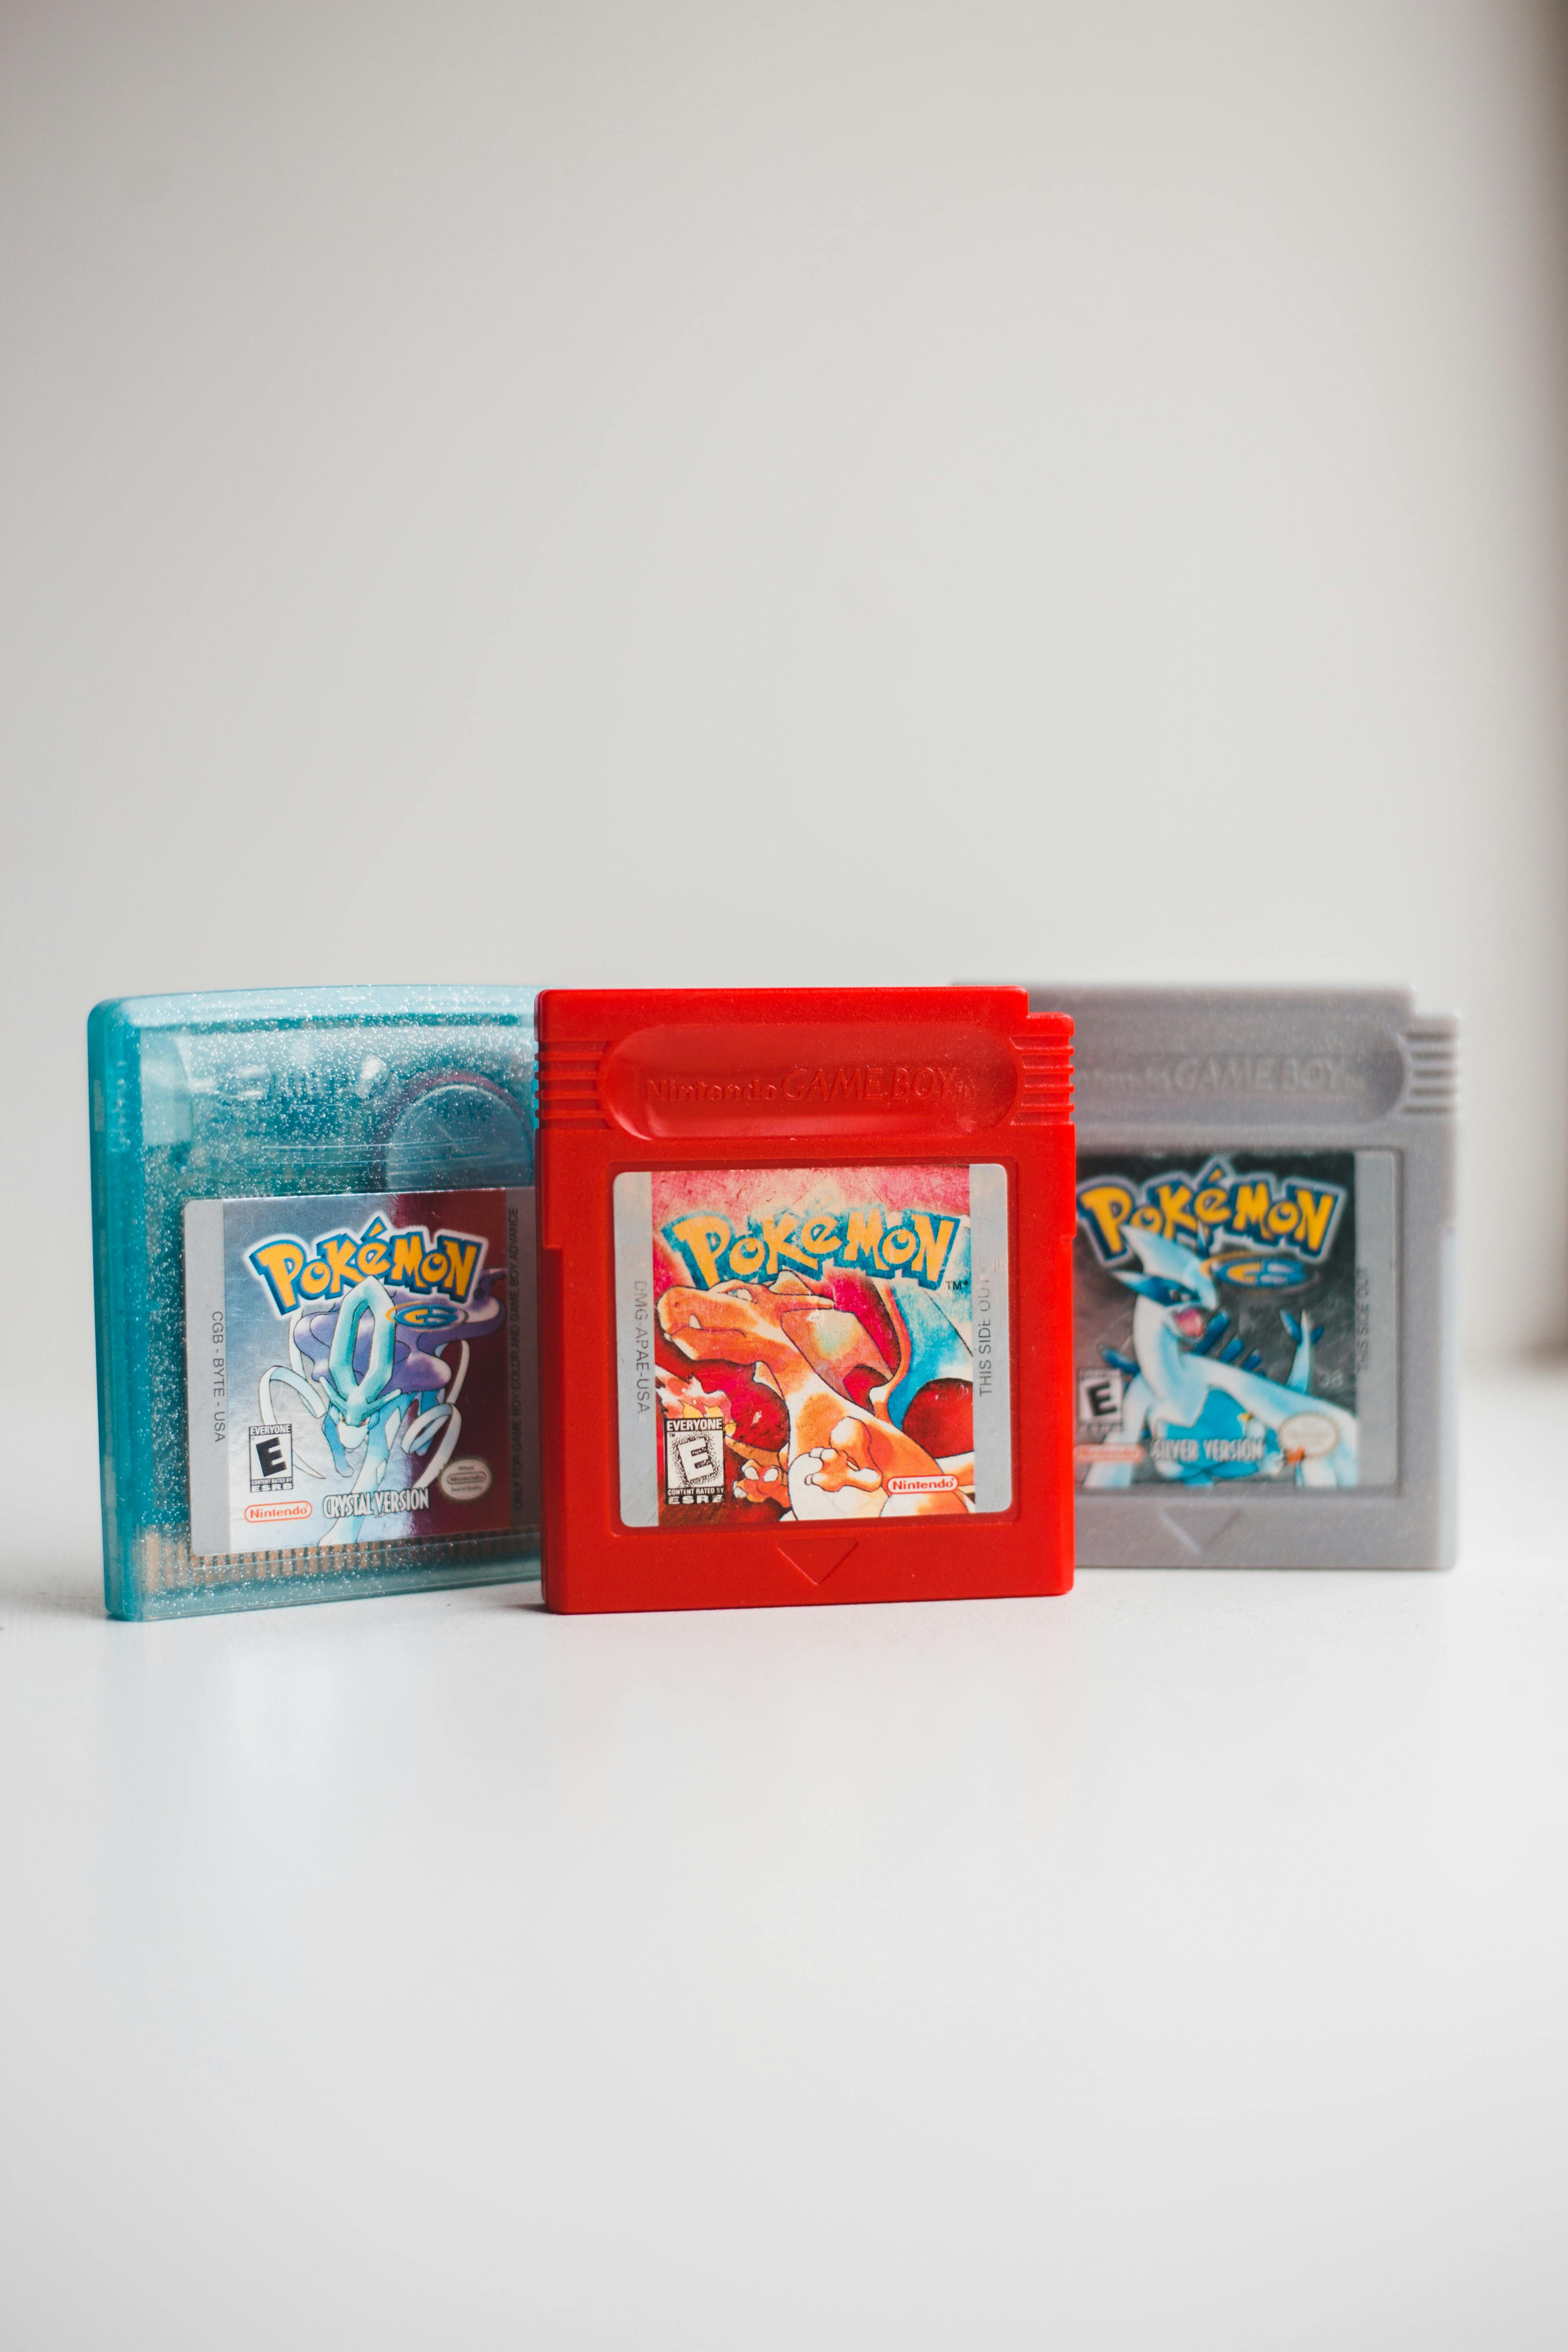 Download Pokemon: Red And Blue wallpapers for mobile phone, free Pokemon:  Red And Blue HD pictures